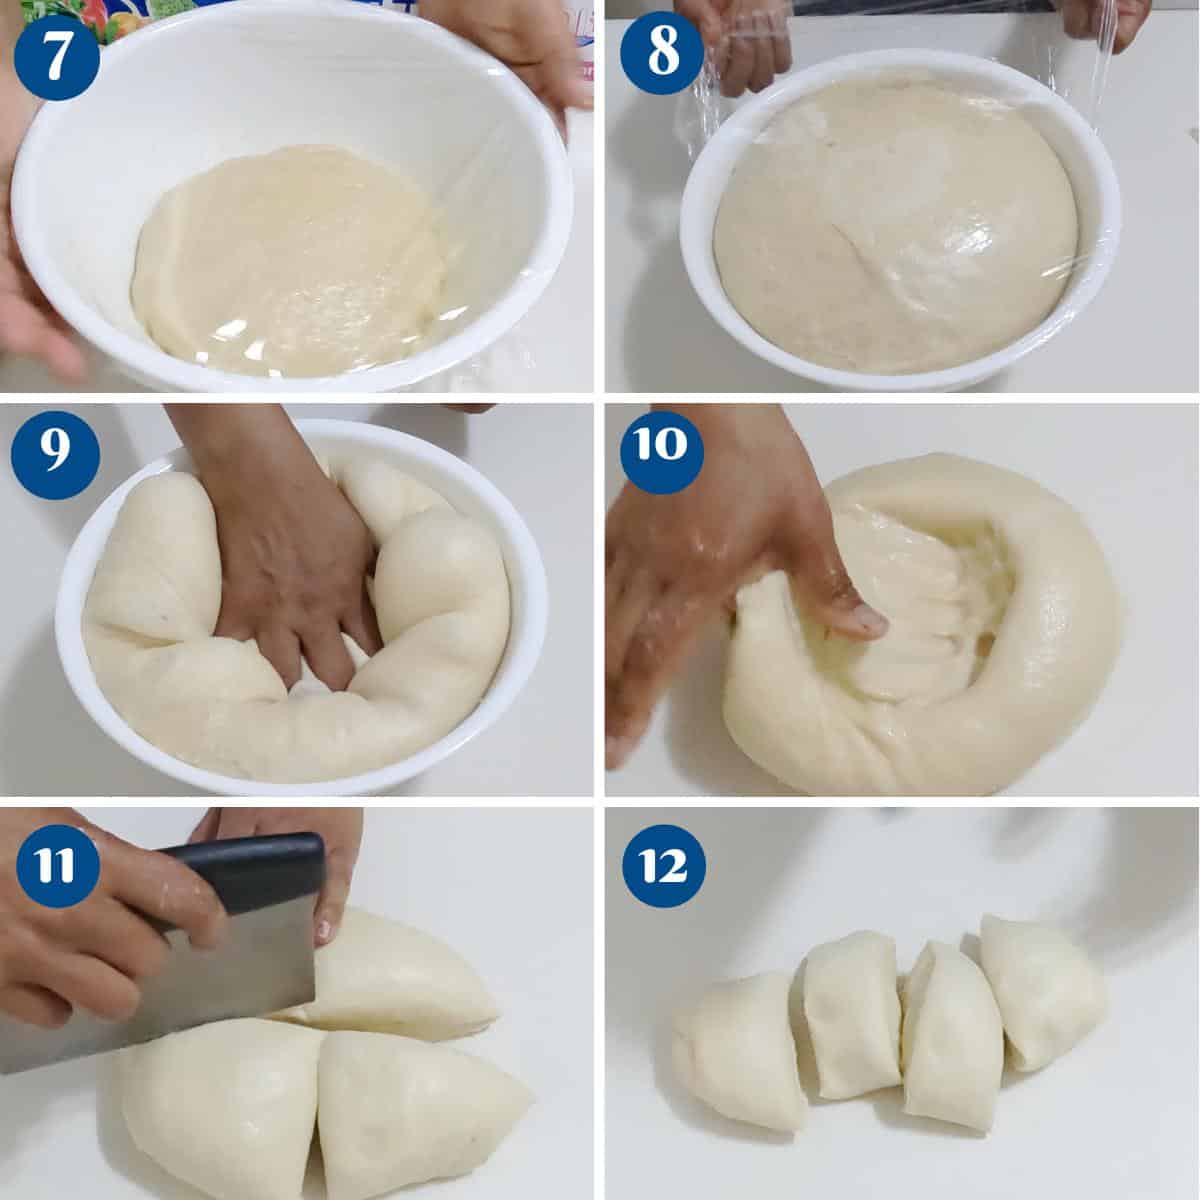 Progress pictures shaping doughnuts.